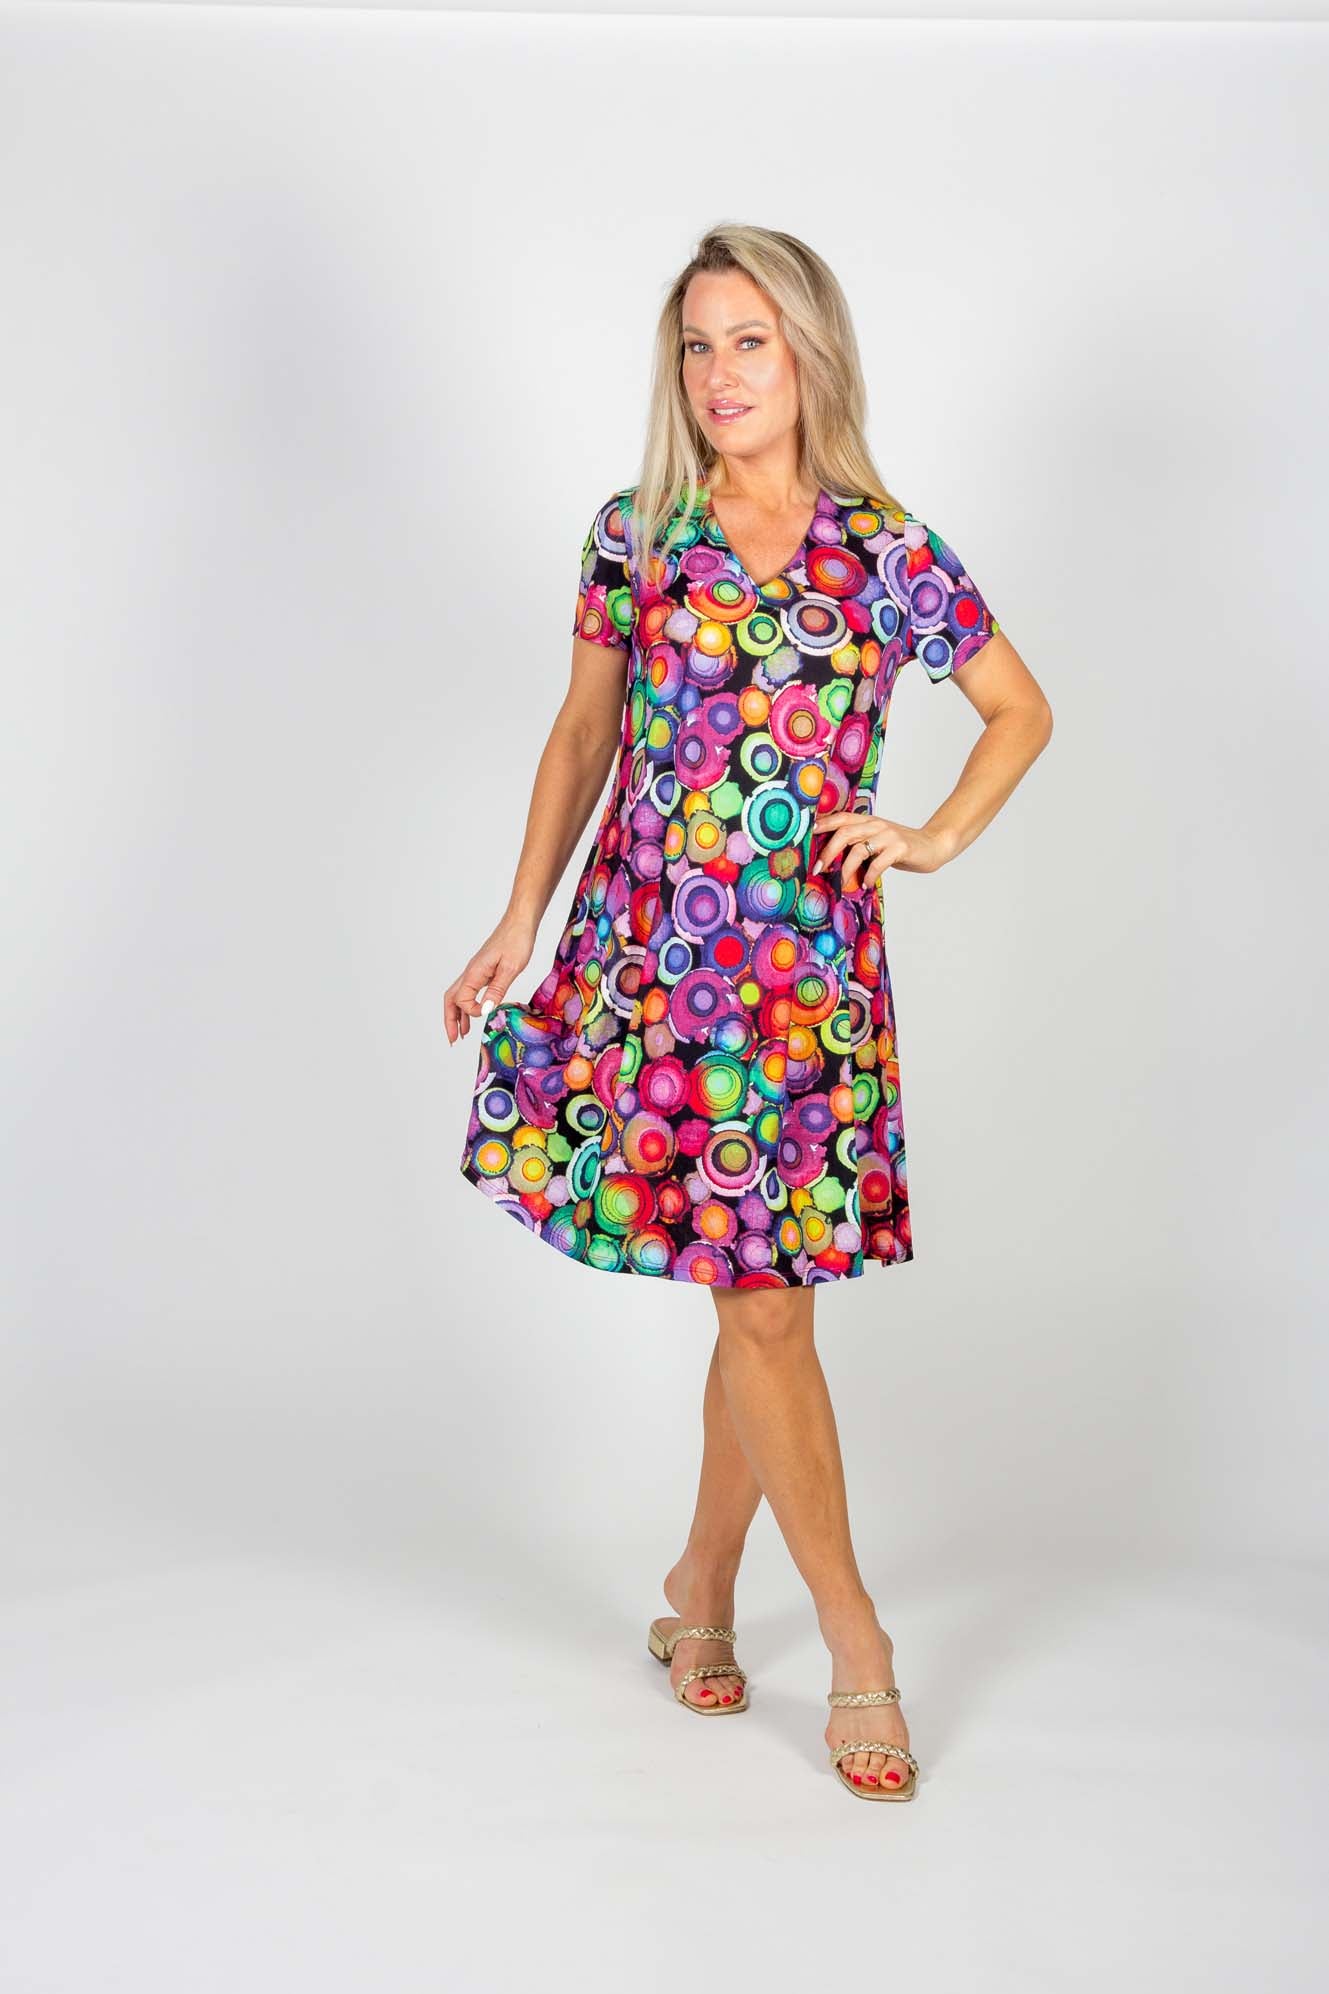 A woman wearing the Chase Dress by Pure Essence featuring a multicolour circles pattern, standing in front of a white background